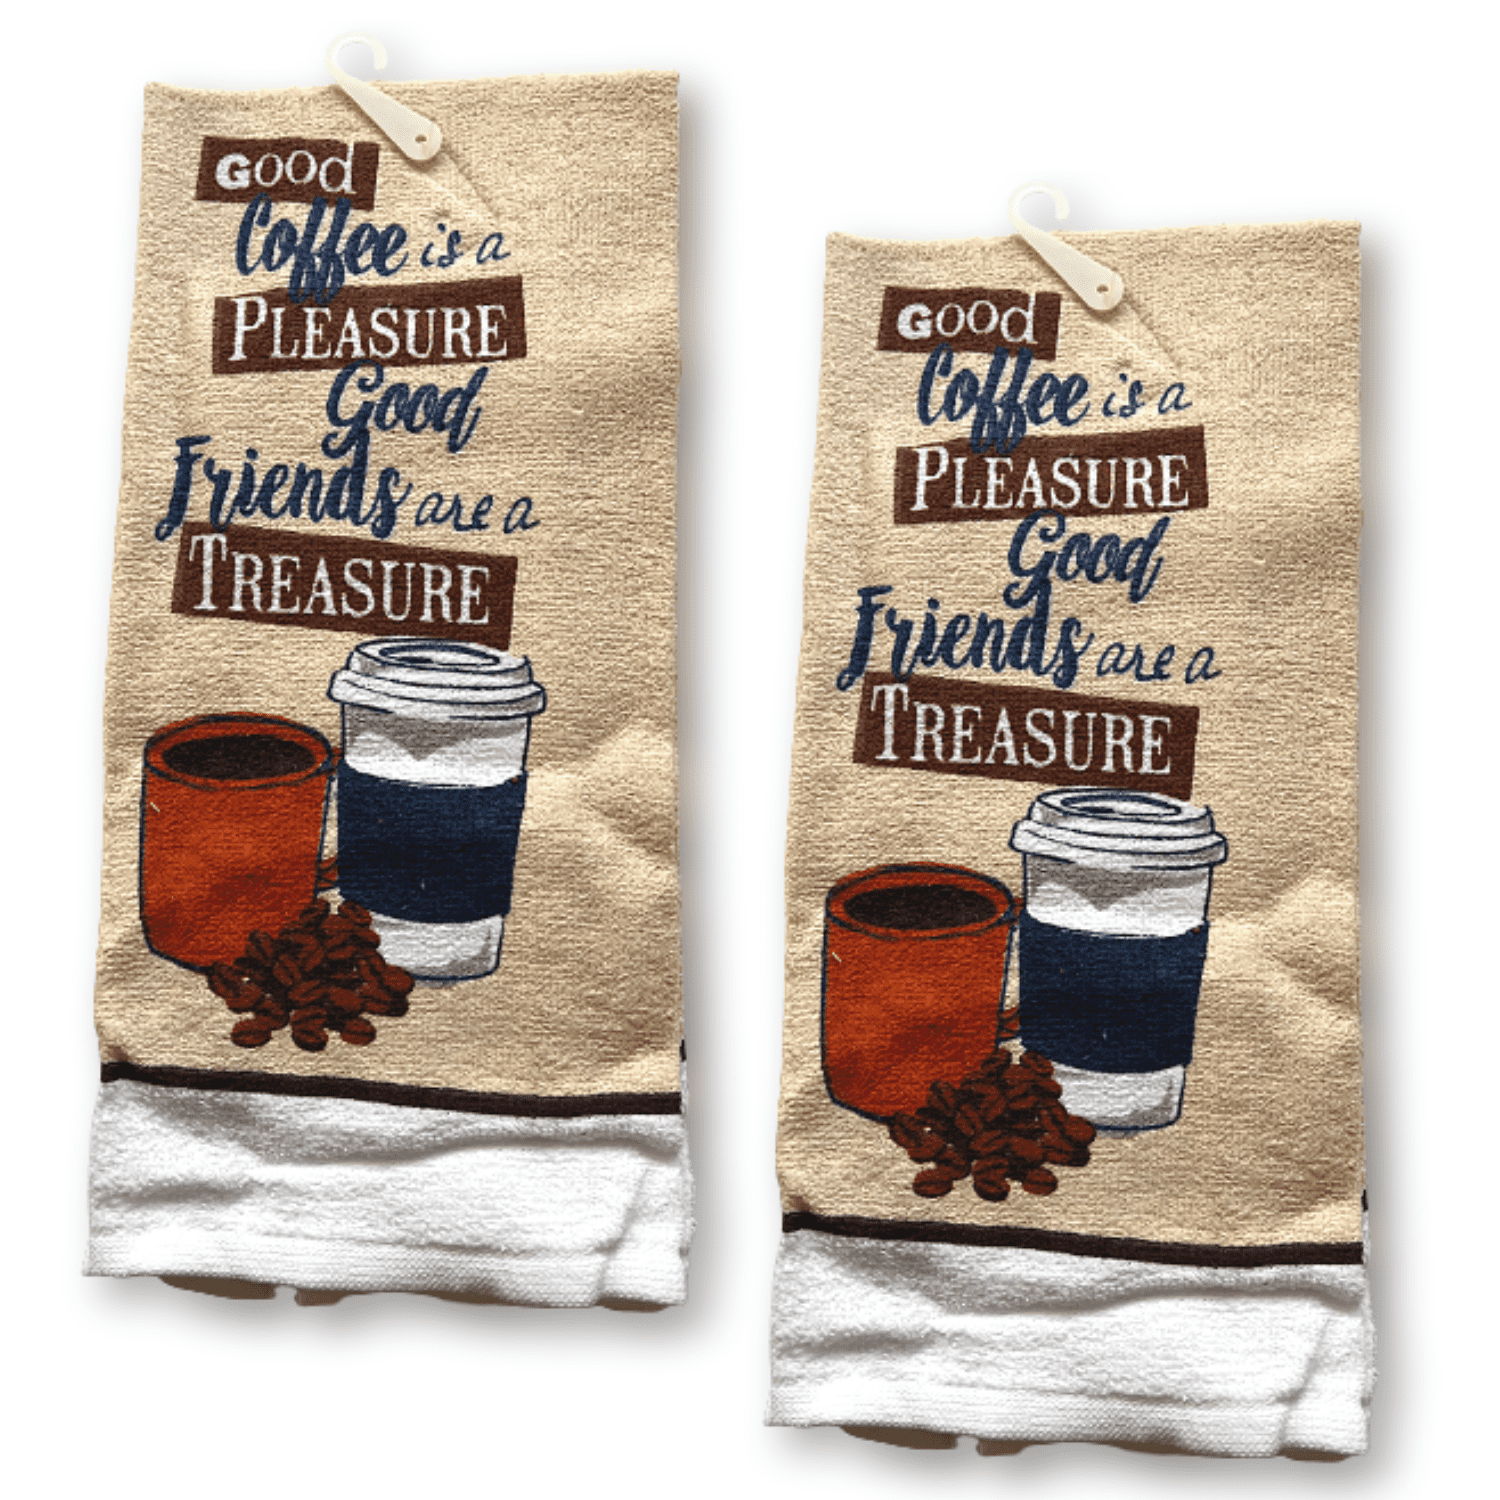 3 SAME PRINTED VELOUR KITCHEN TOWELS 15 x 25, COFFEE JARS & CUP by BH